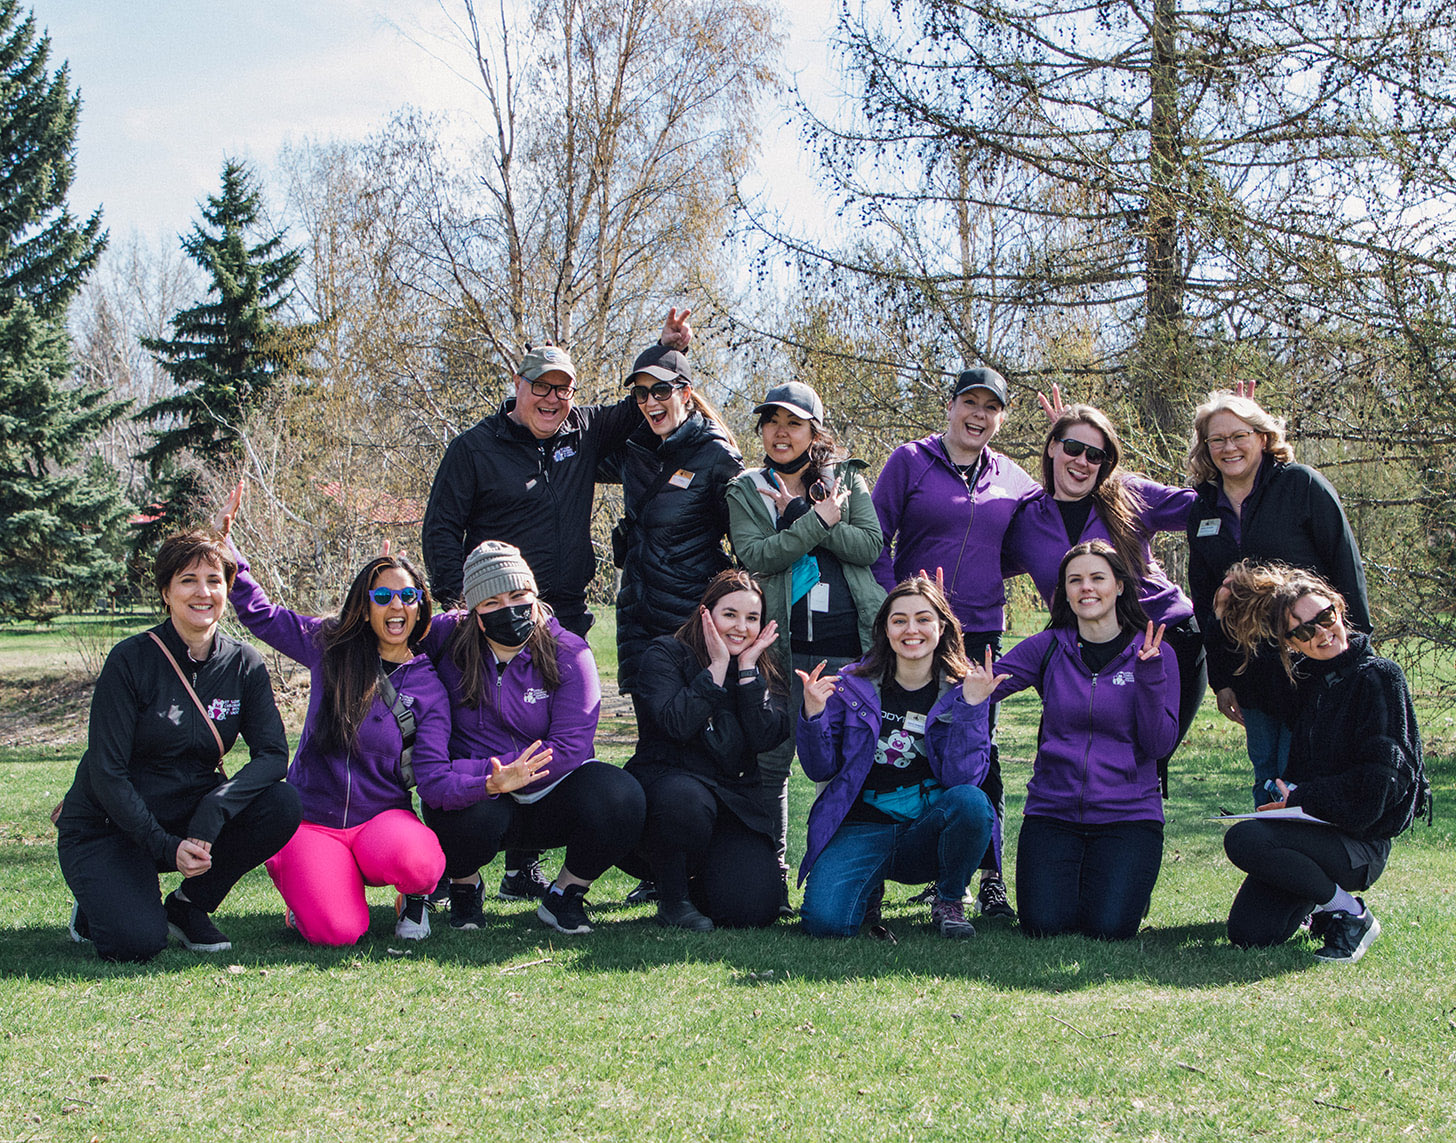 stollery staff at teddy bear fun fest outdoor event